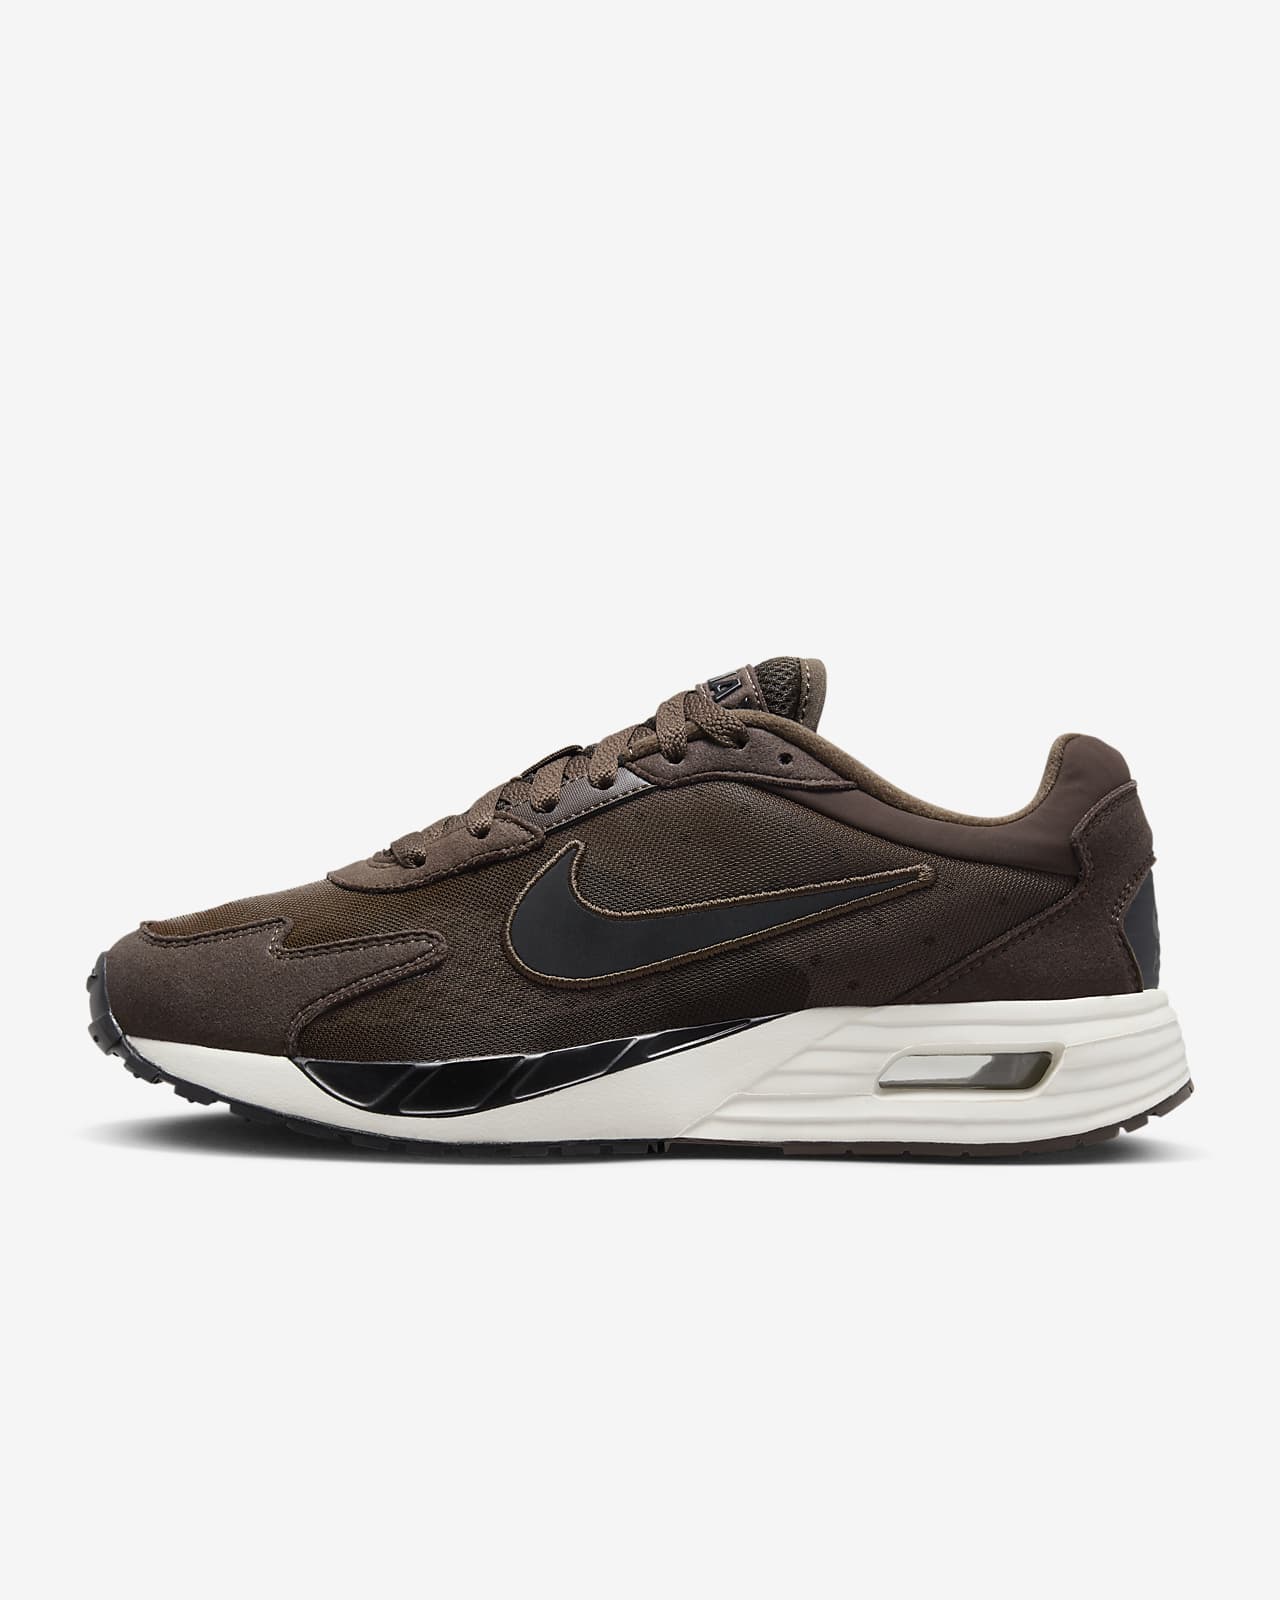 Women's Nike Air Max Solo Casual Shoes